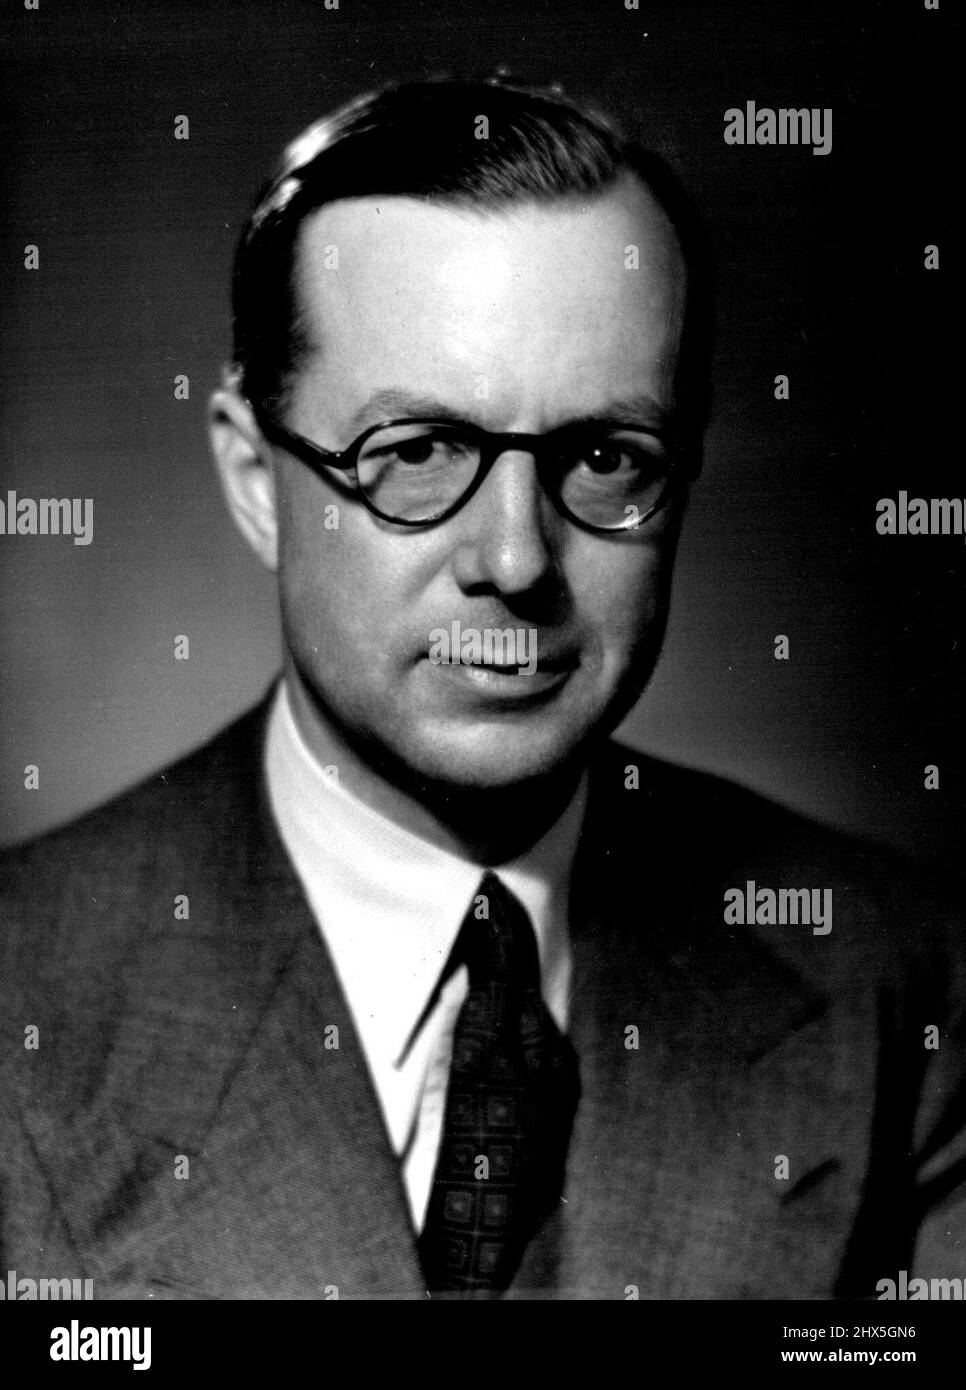 Sir Edwin Noel Plowden, KCB, KBE. - Chairman of the Atomic Energy Research Authority; formerly Chief Planning Officer and Chairman of the Economic Planning Board. September 14, 1954. (Photo by Fayer, Camera Press). Stock Photo